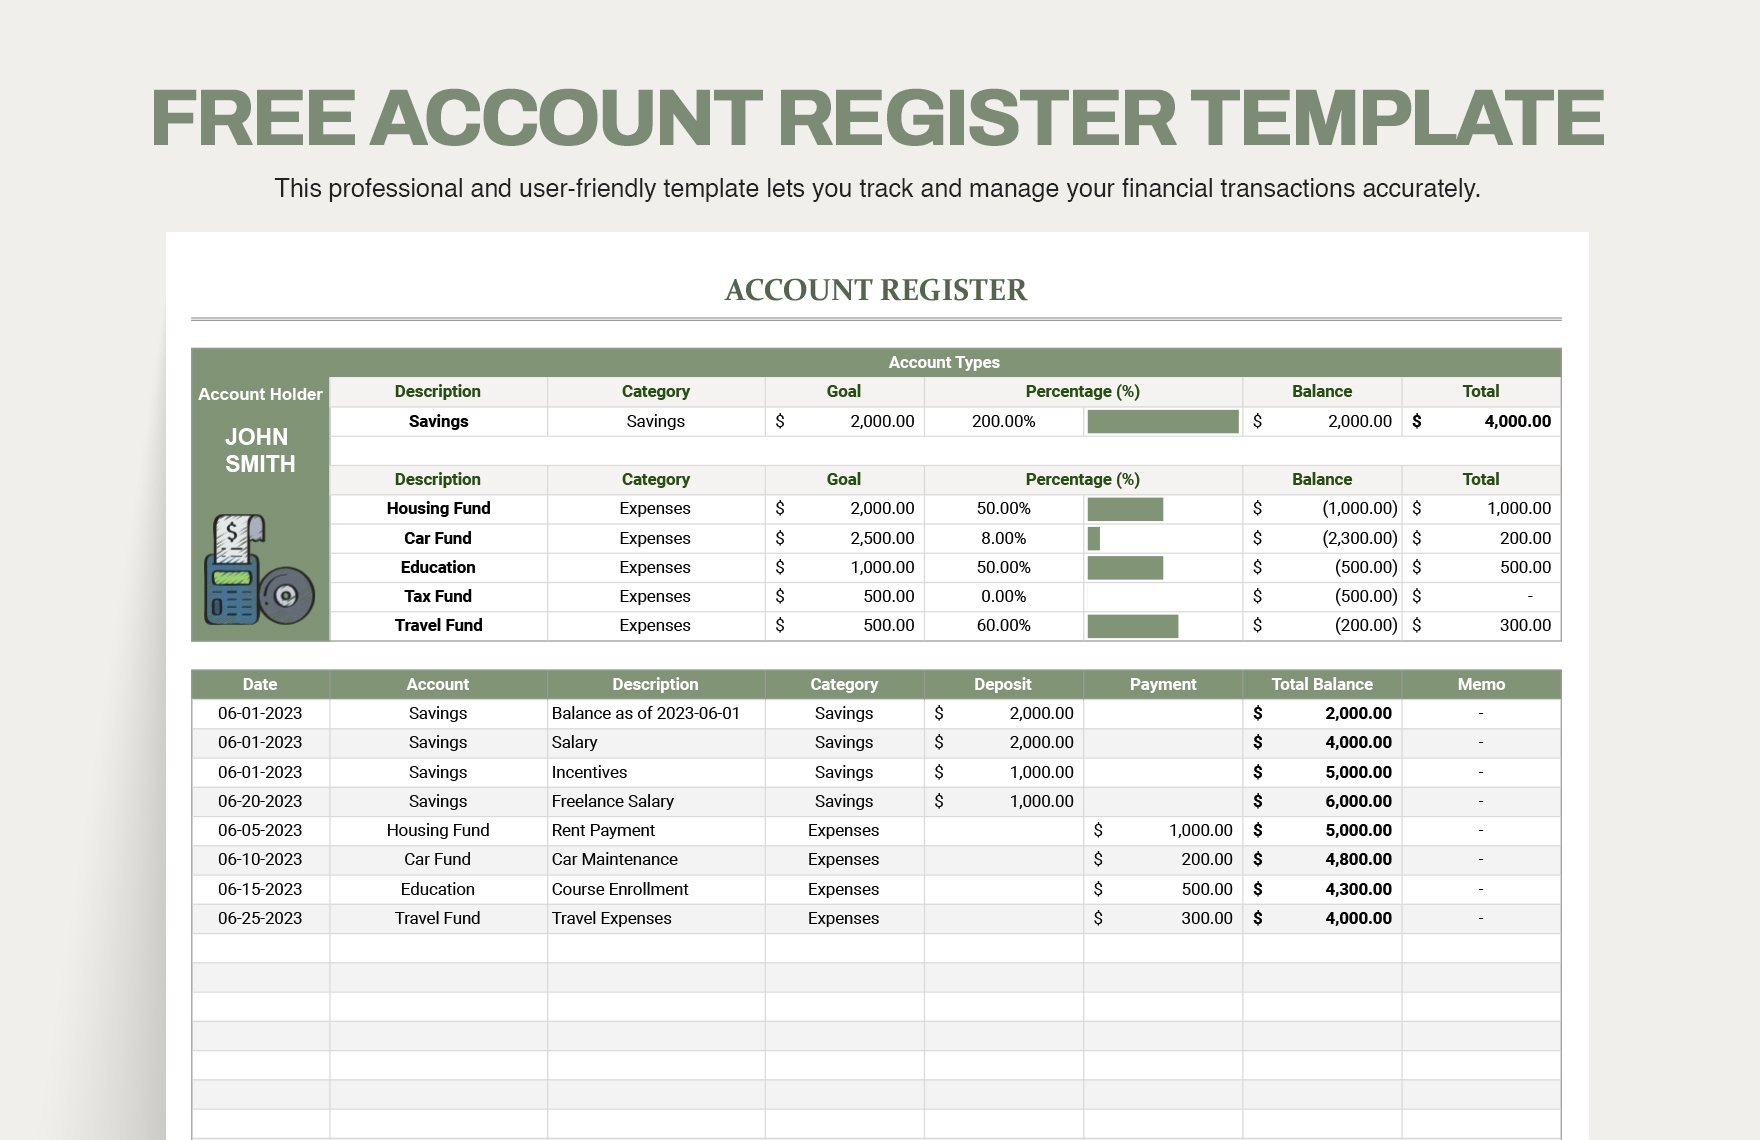 Free Account Register Template